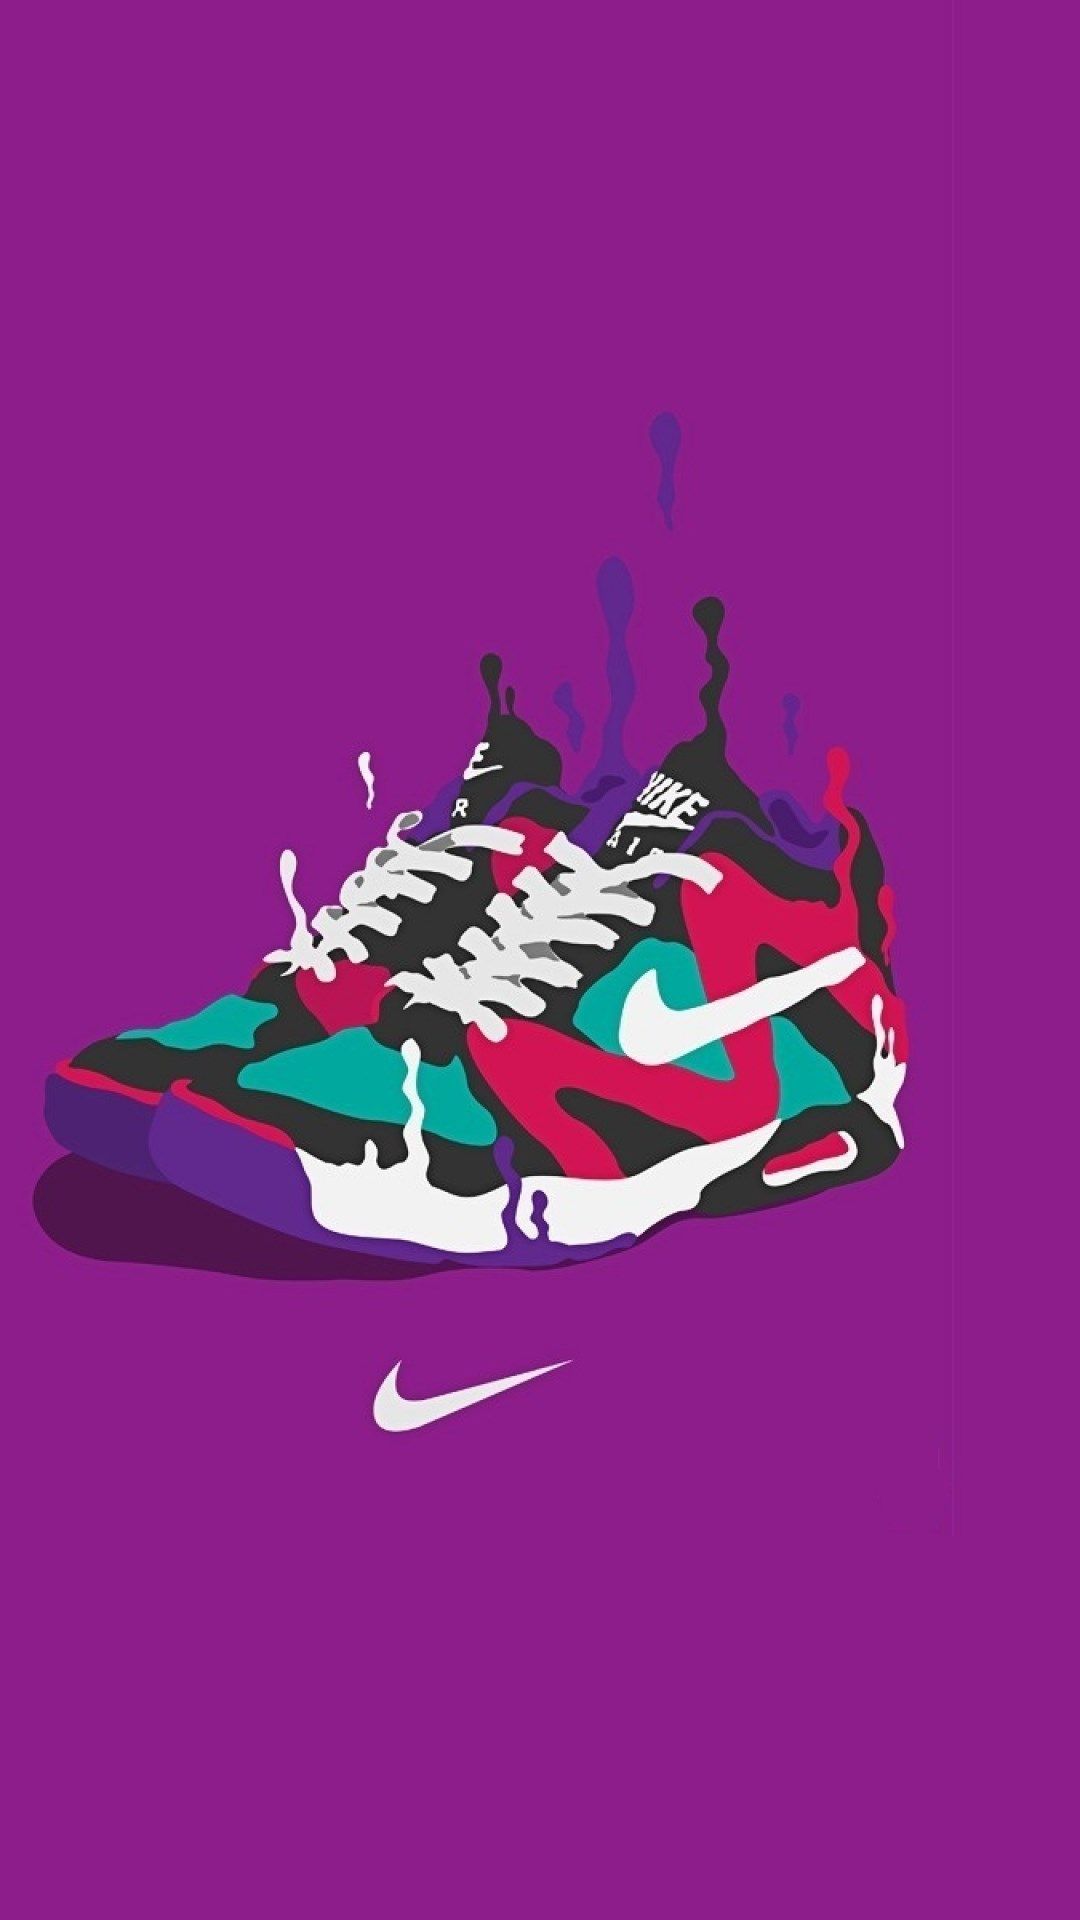 Nike Air Wallpapers on